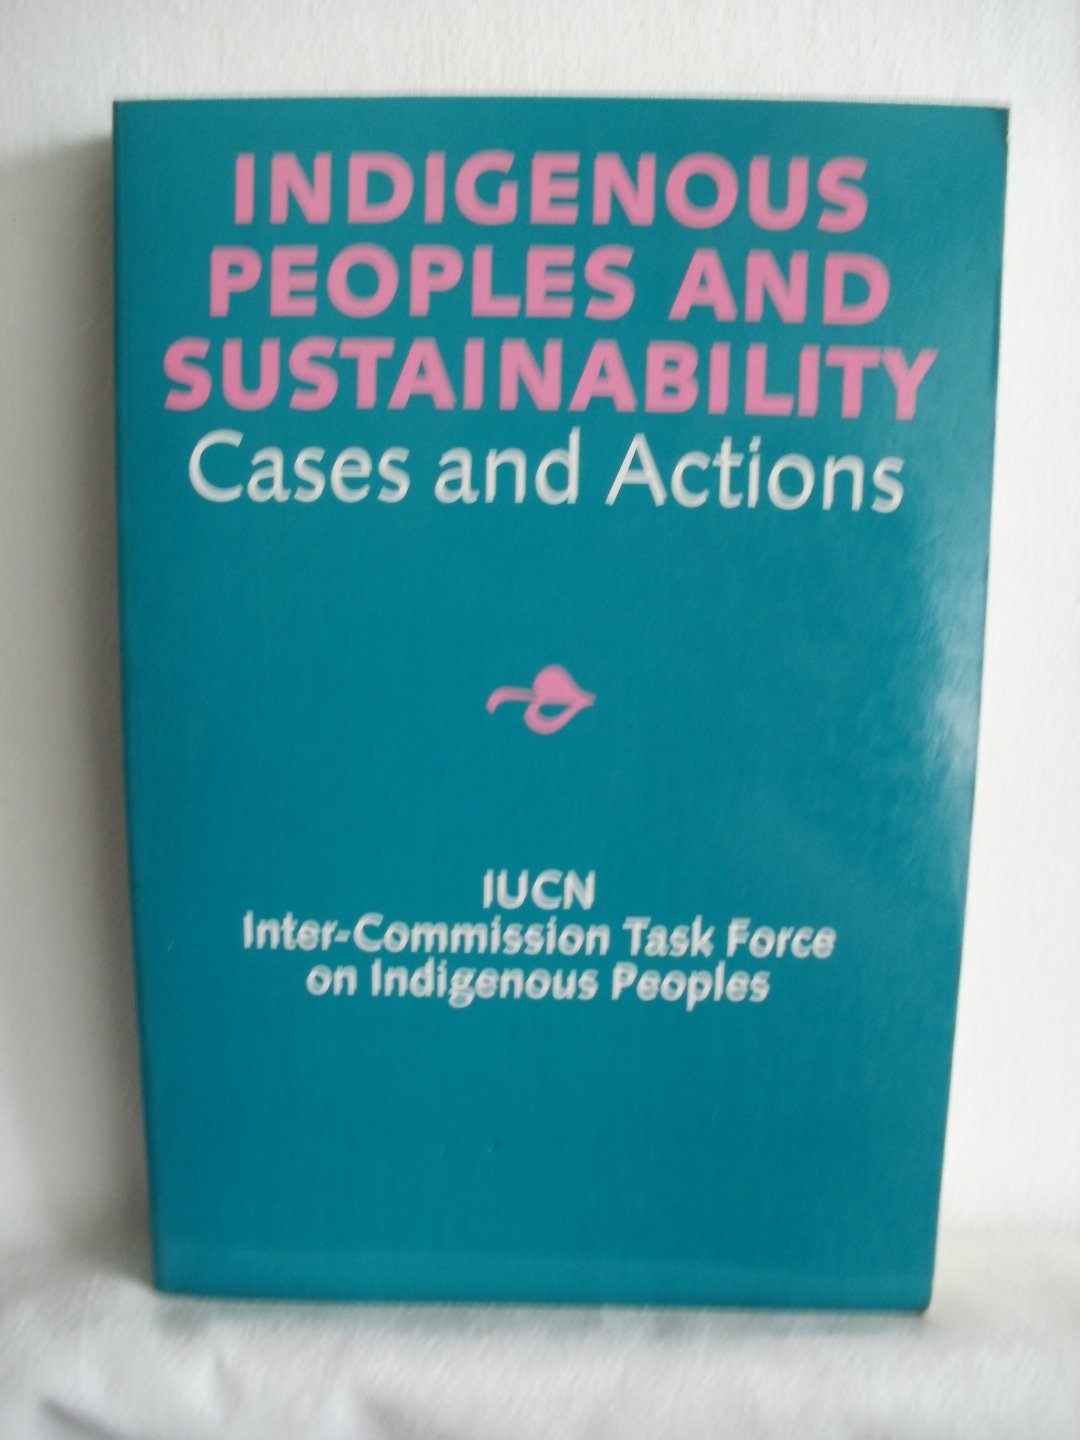 Posey, dr. Darrell A.; IUCN, Inter-Commission Task Force on Indigenous Peoples (eds.) - Indigenous Peopls and Sutainability. Cases and Actions.